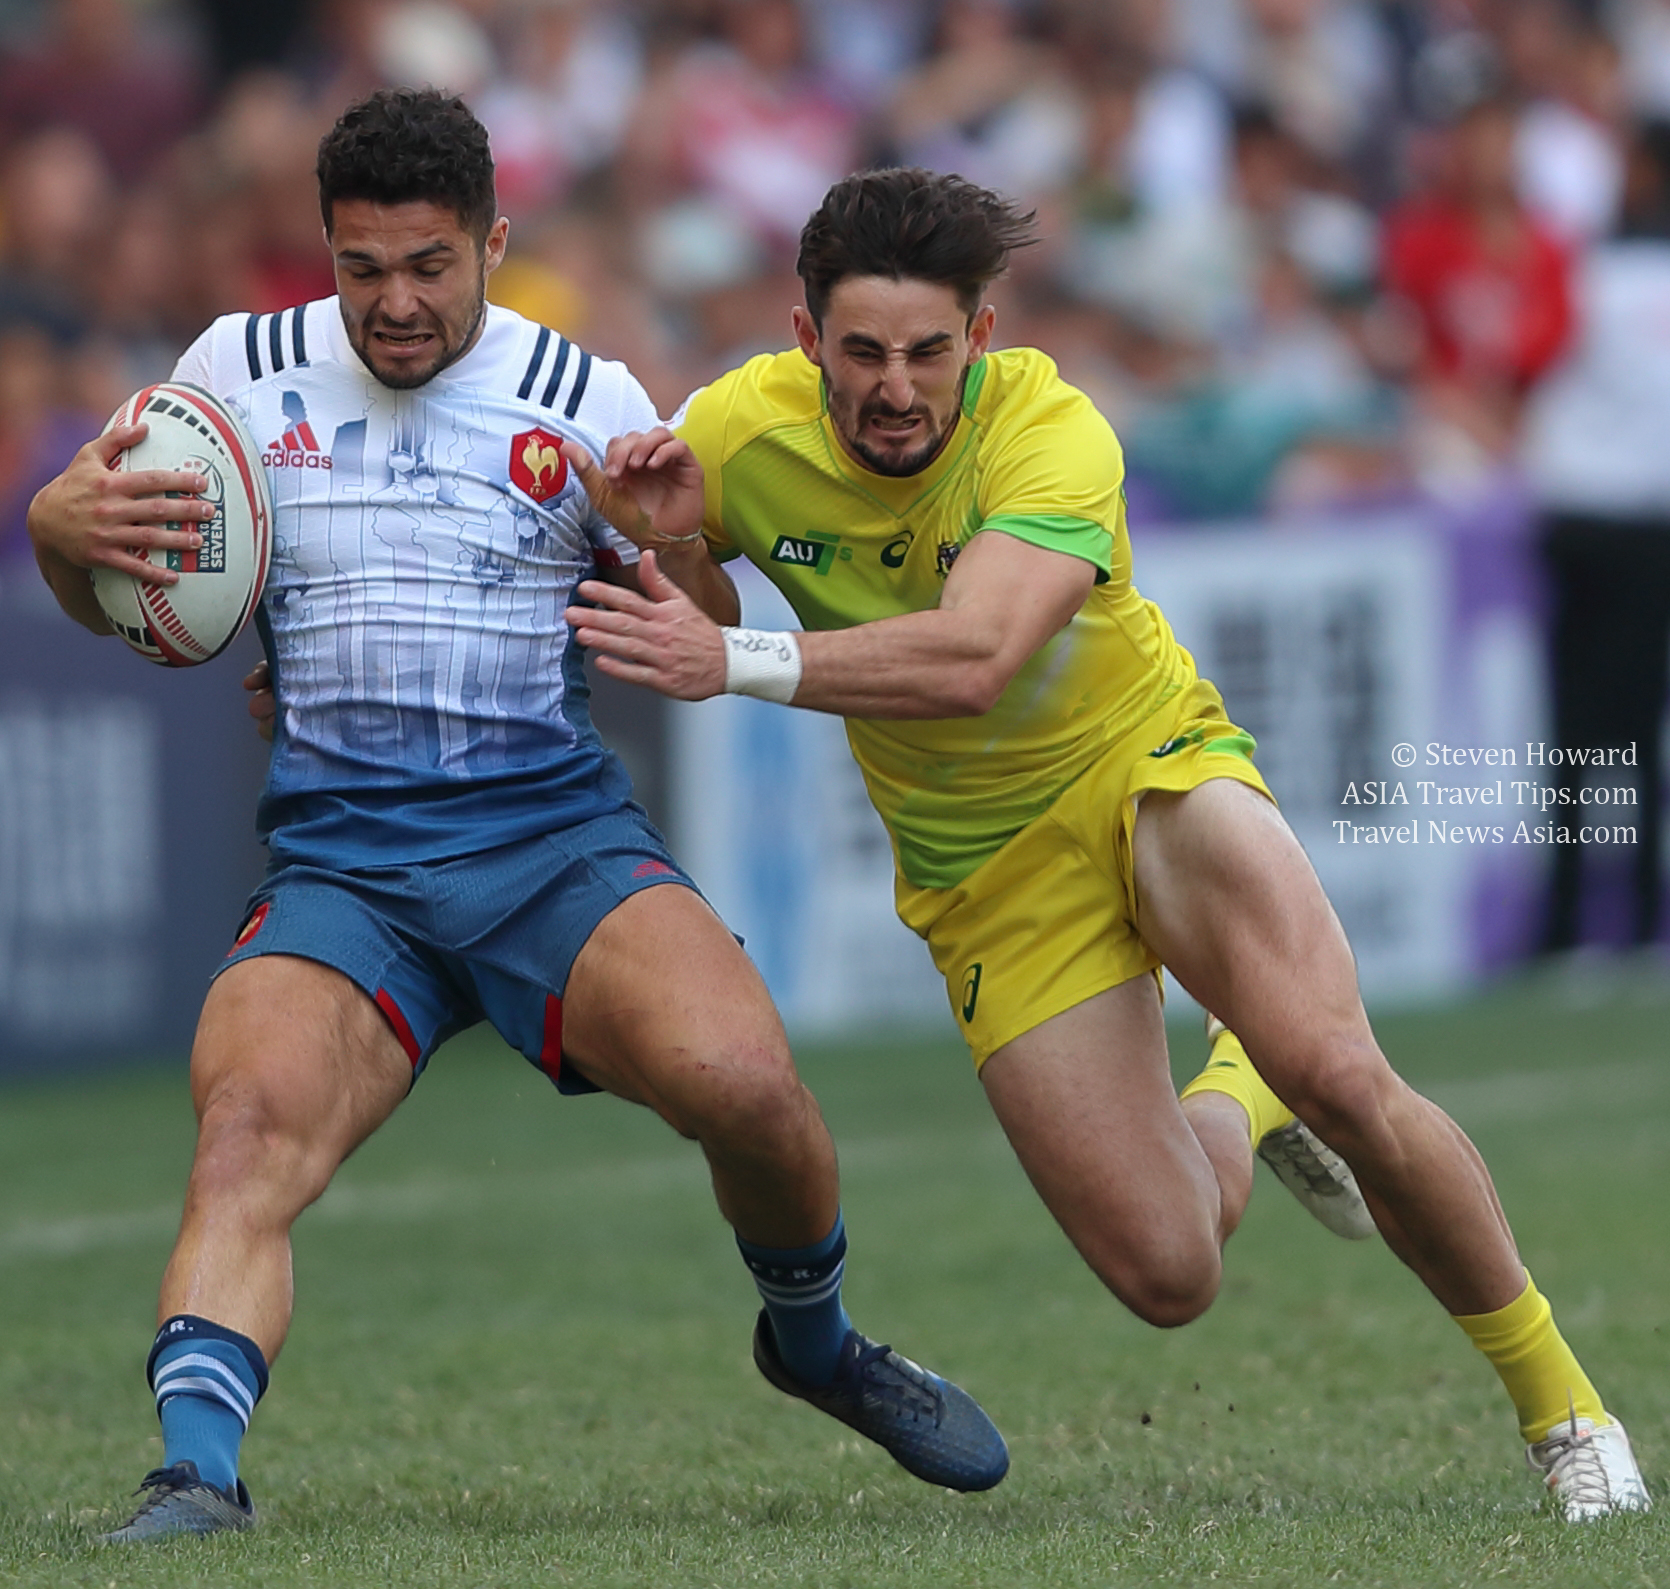 Pictures from 2018 Cathay Pacific / HSBC Hong Kong Sevens